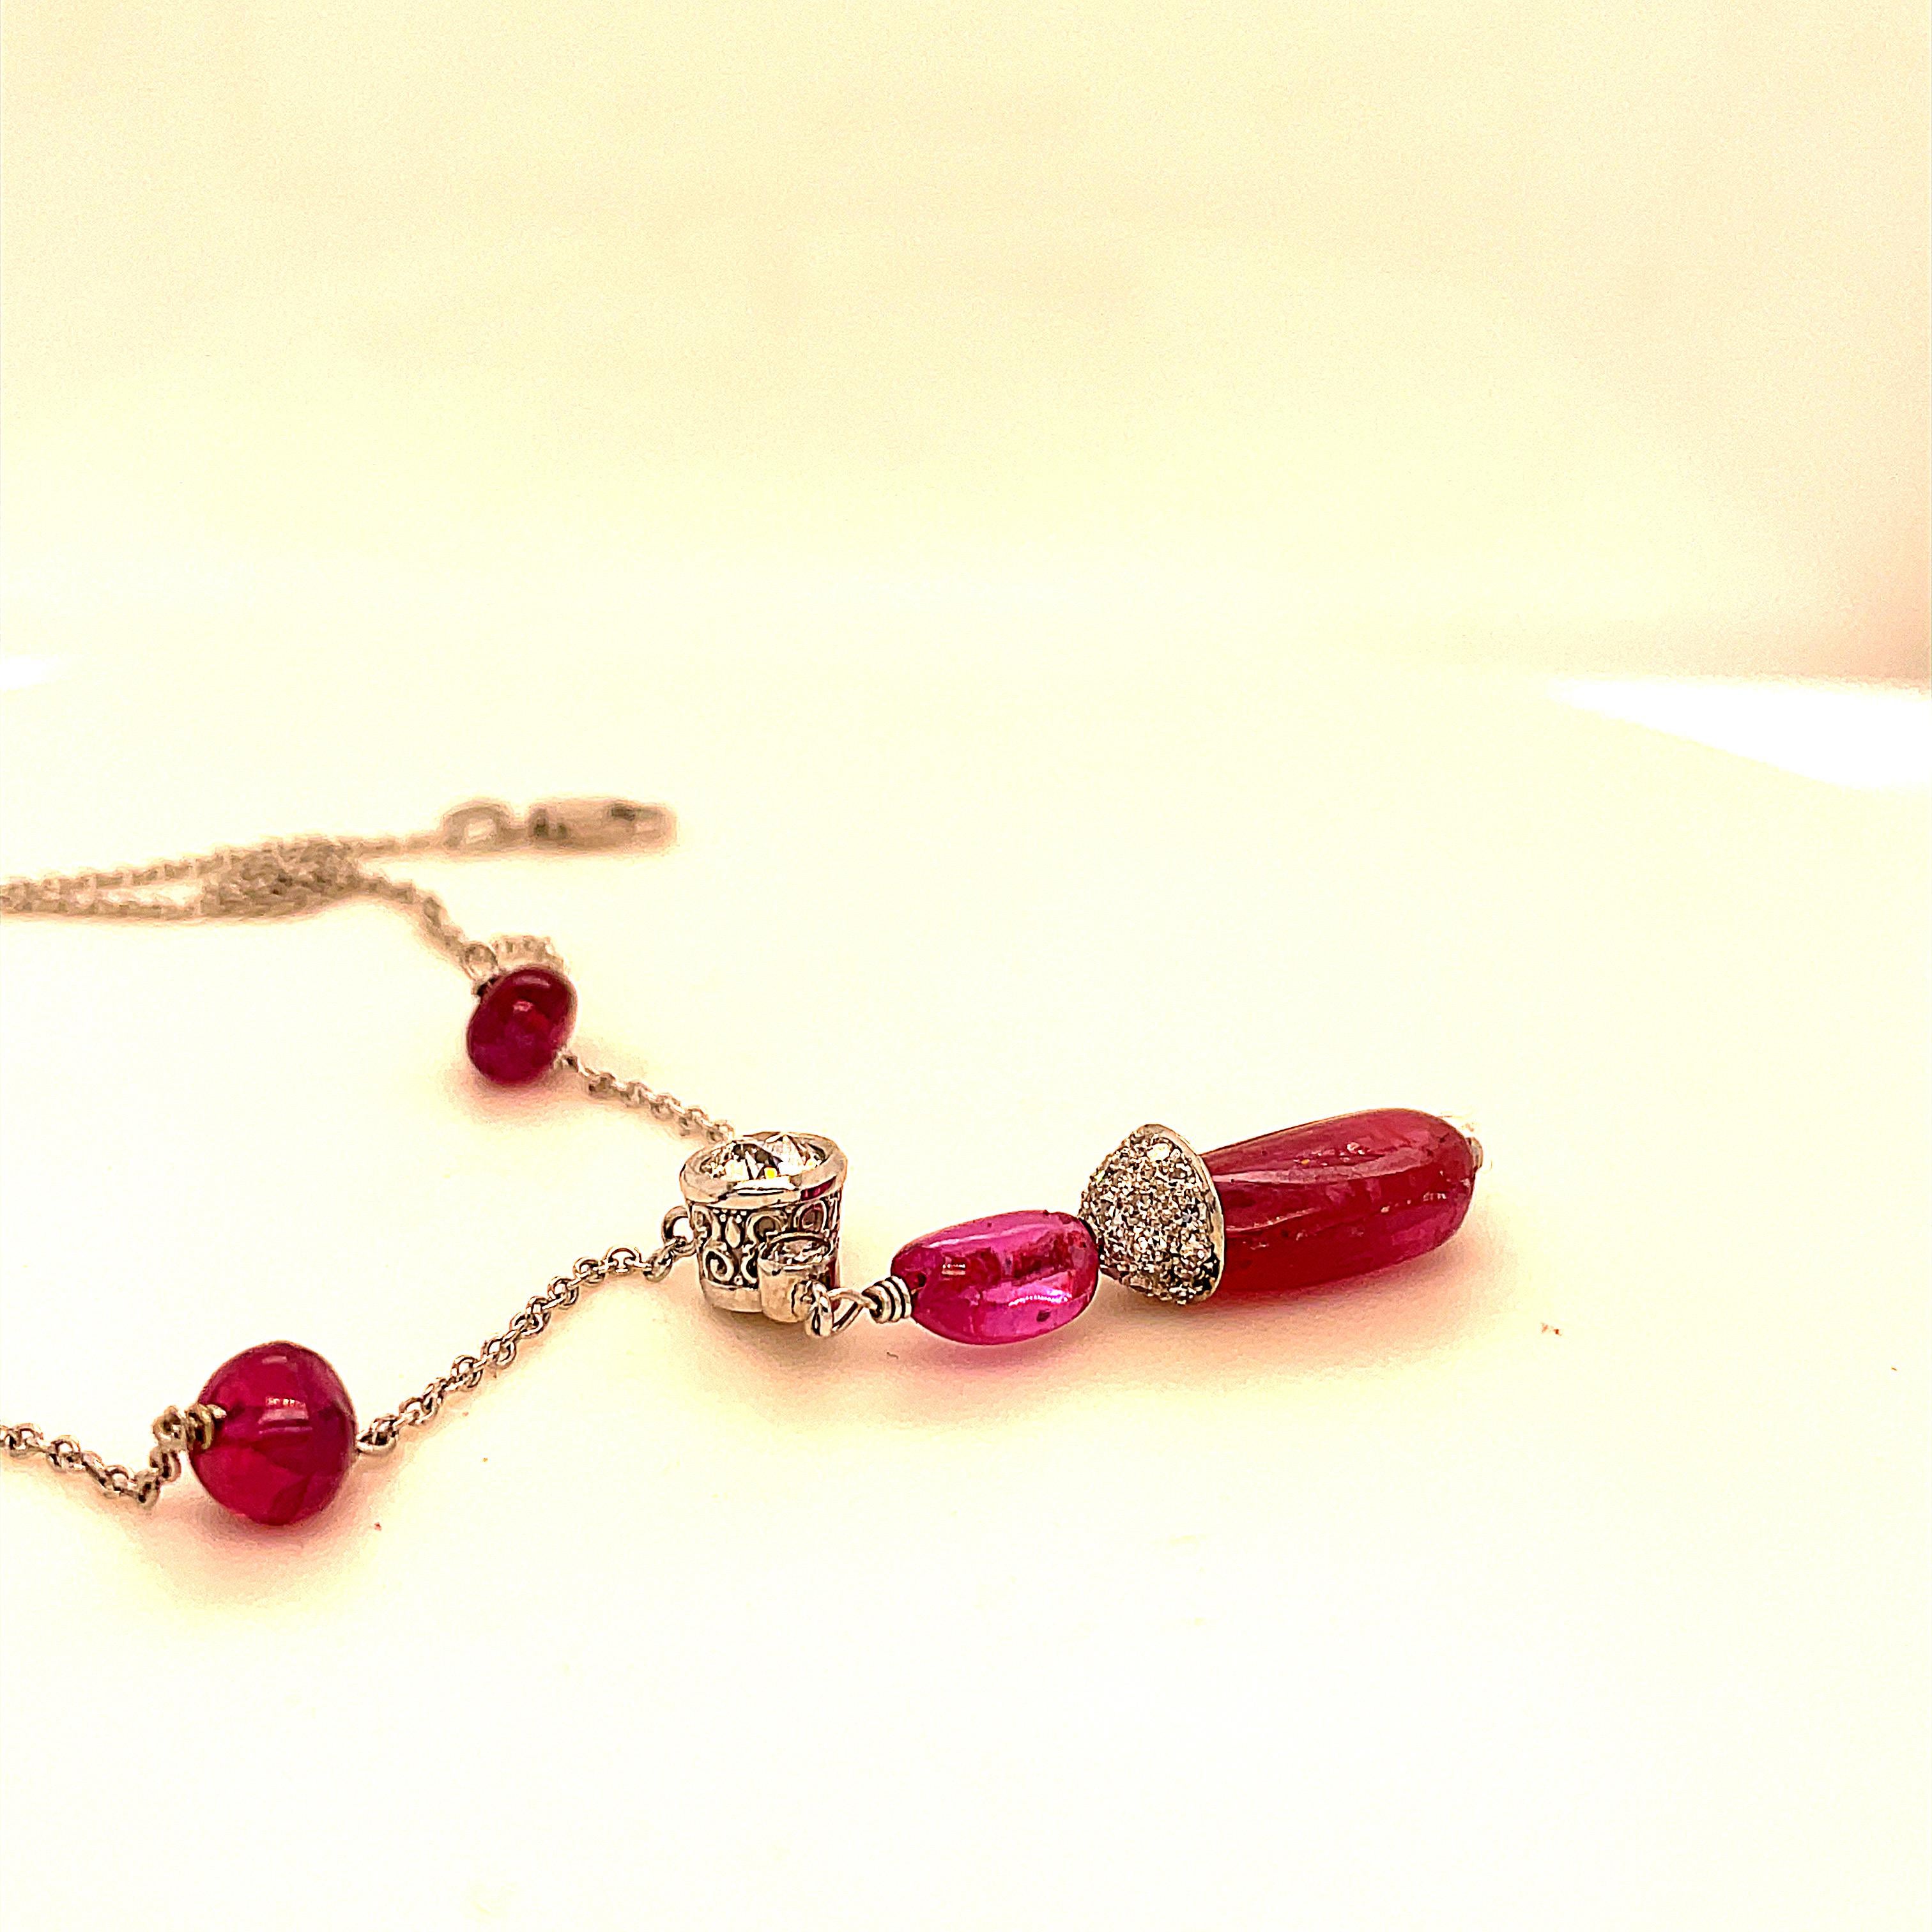 Edwardian style ruby and diamond platinum /white gold necklace.  Old European-cut diamonds, with lovely pigeon blood red rubies,  make a spectacular happy looking piece of jewelry. All the stones were mined and cut a long time ago. The stone quality